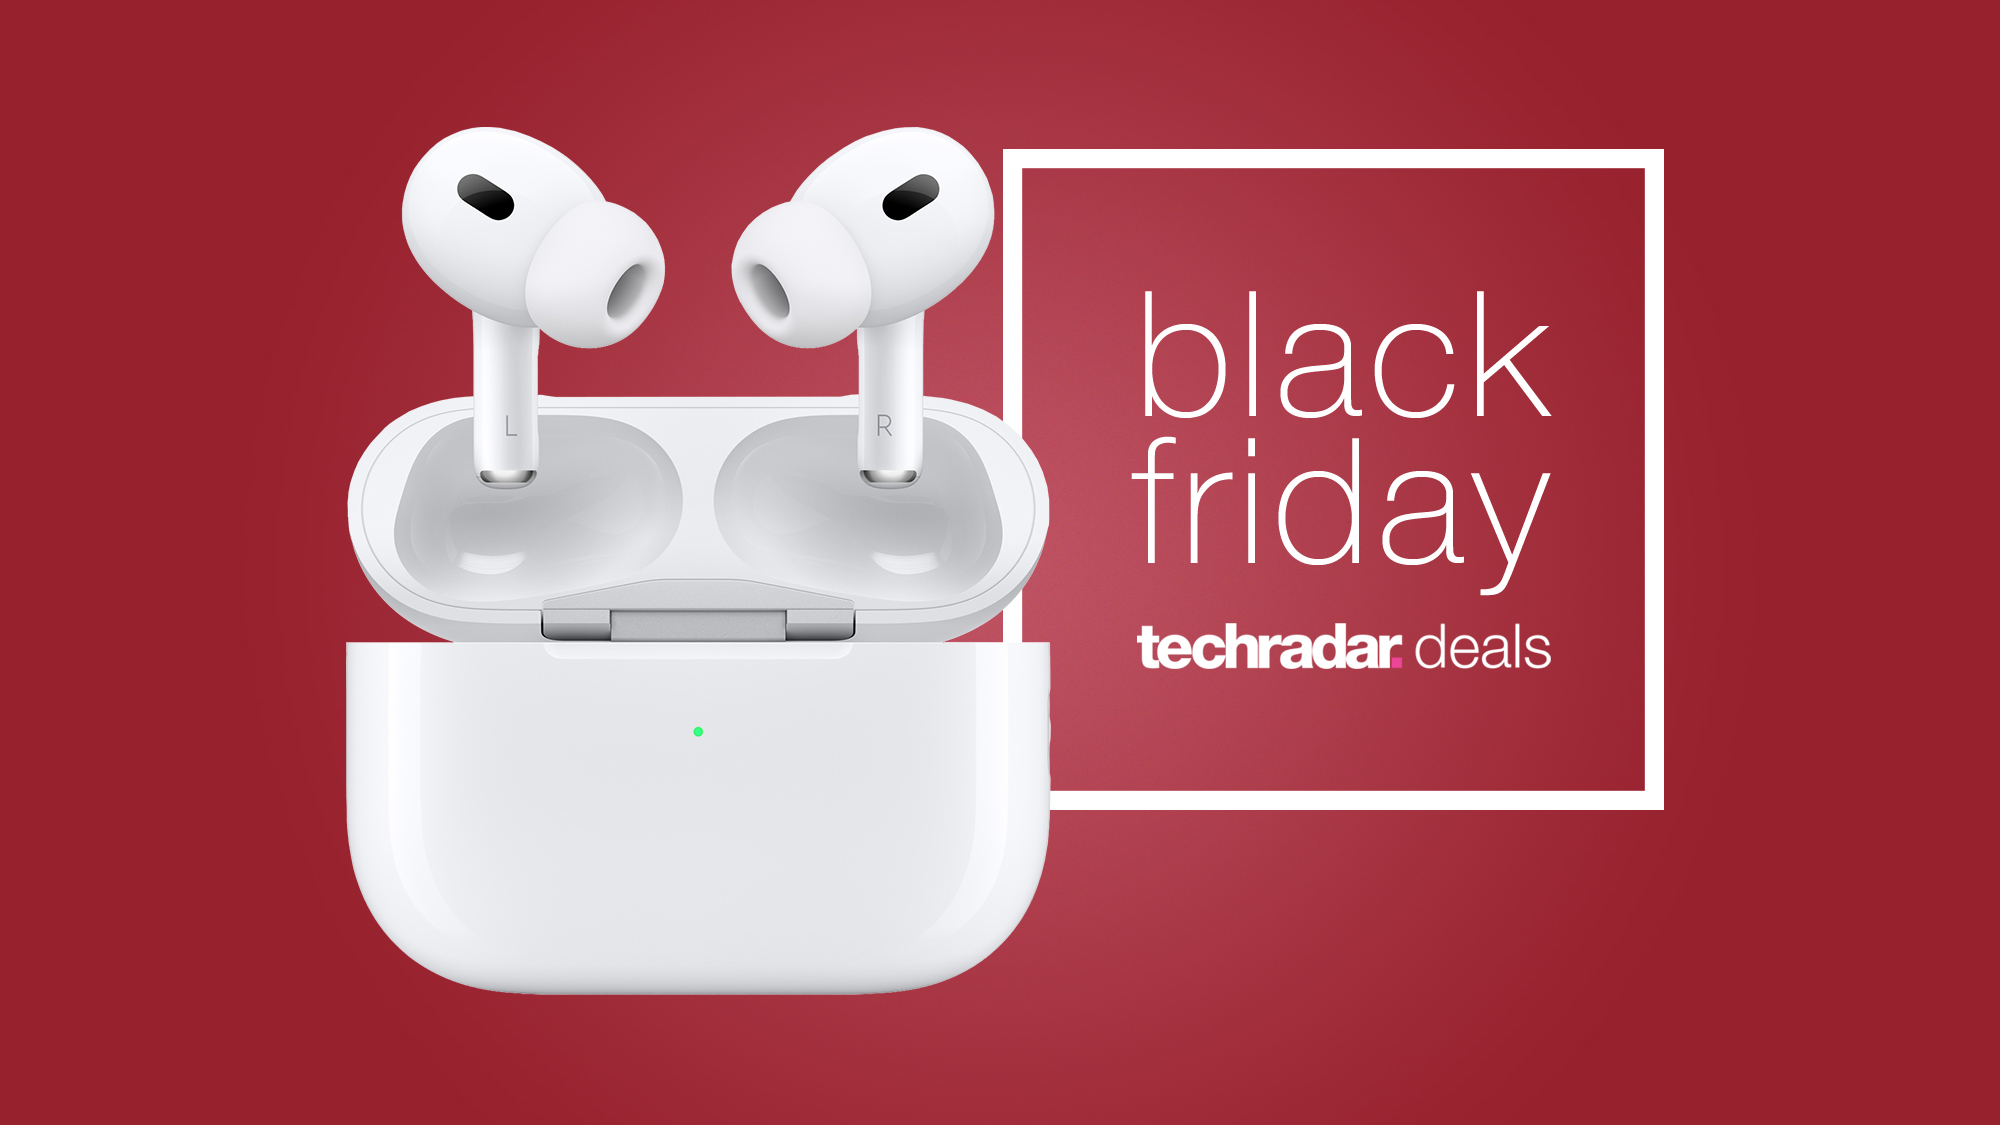 Apple AirPods Pro 2 on red background, with sign saying Black Friday deals